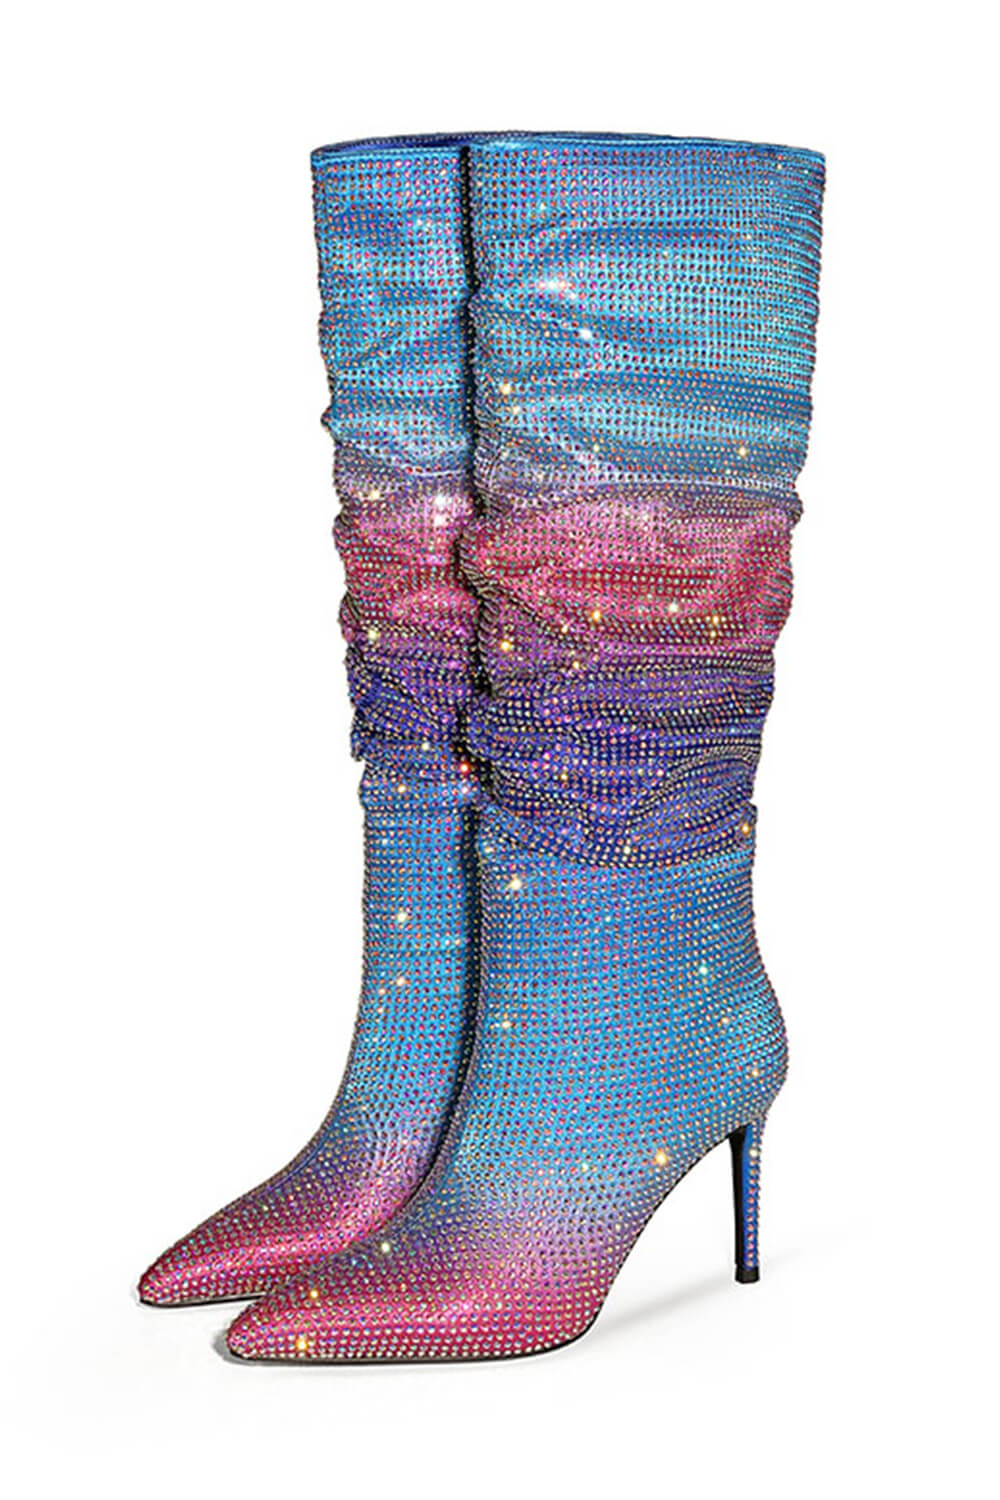 Ombre Multi Rhinestone Ruched Mid-Calf Pointed Toe Stiletto Boots - Blue